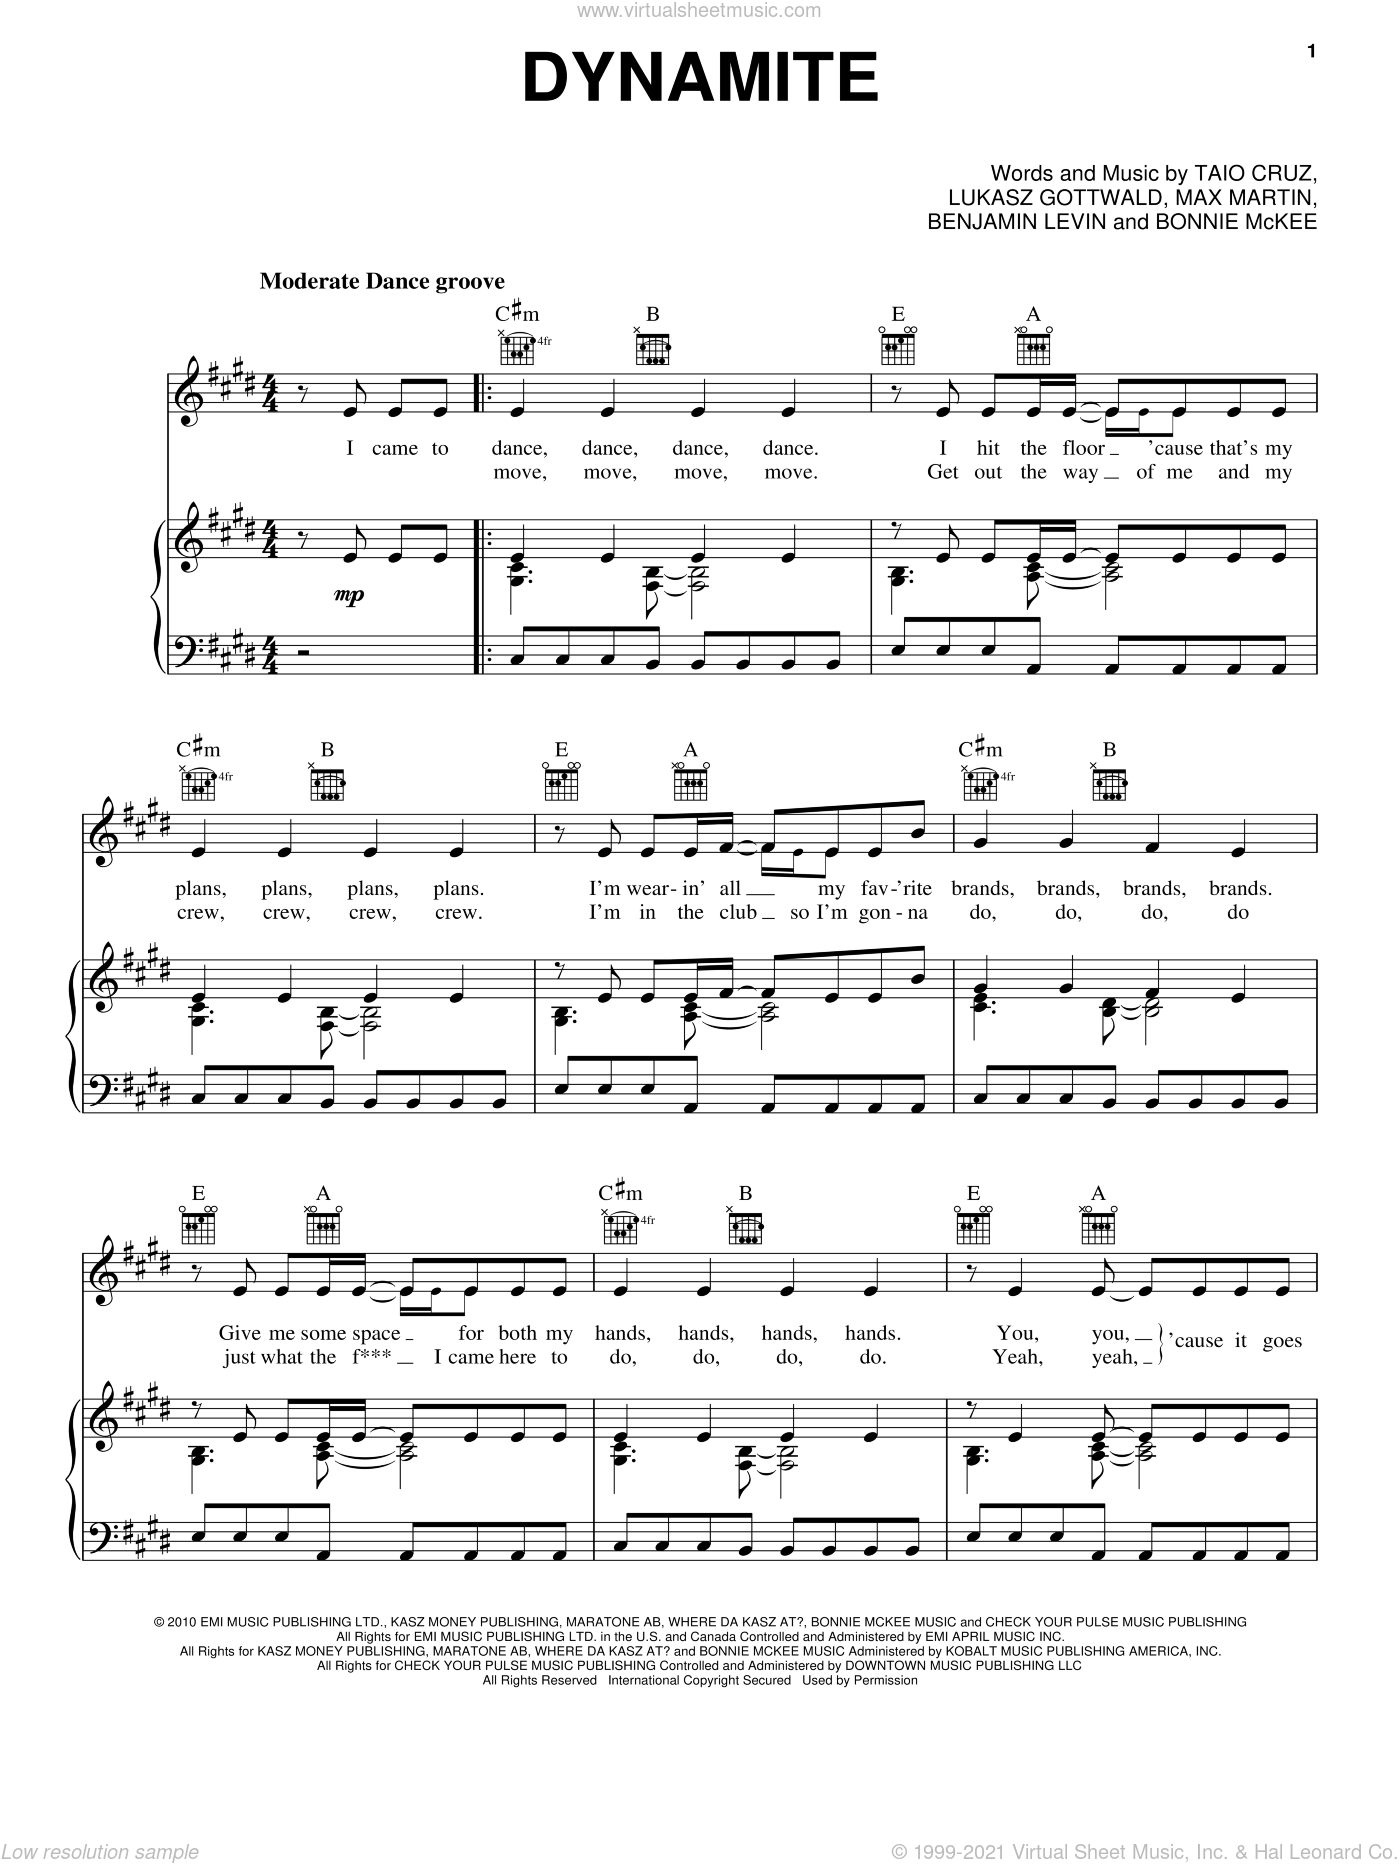 Dynamite Sheet Music For Voice Piano Or Guitar PDF V2 - Dynamite Piano Sheet Music Free Printable